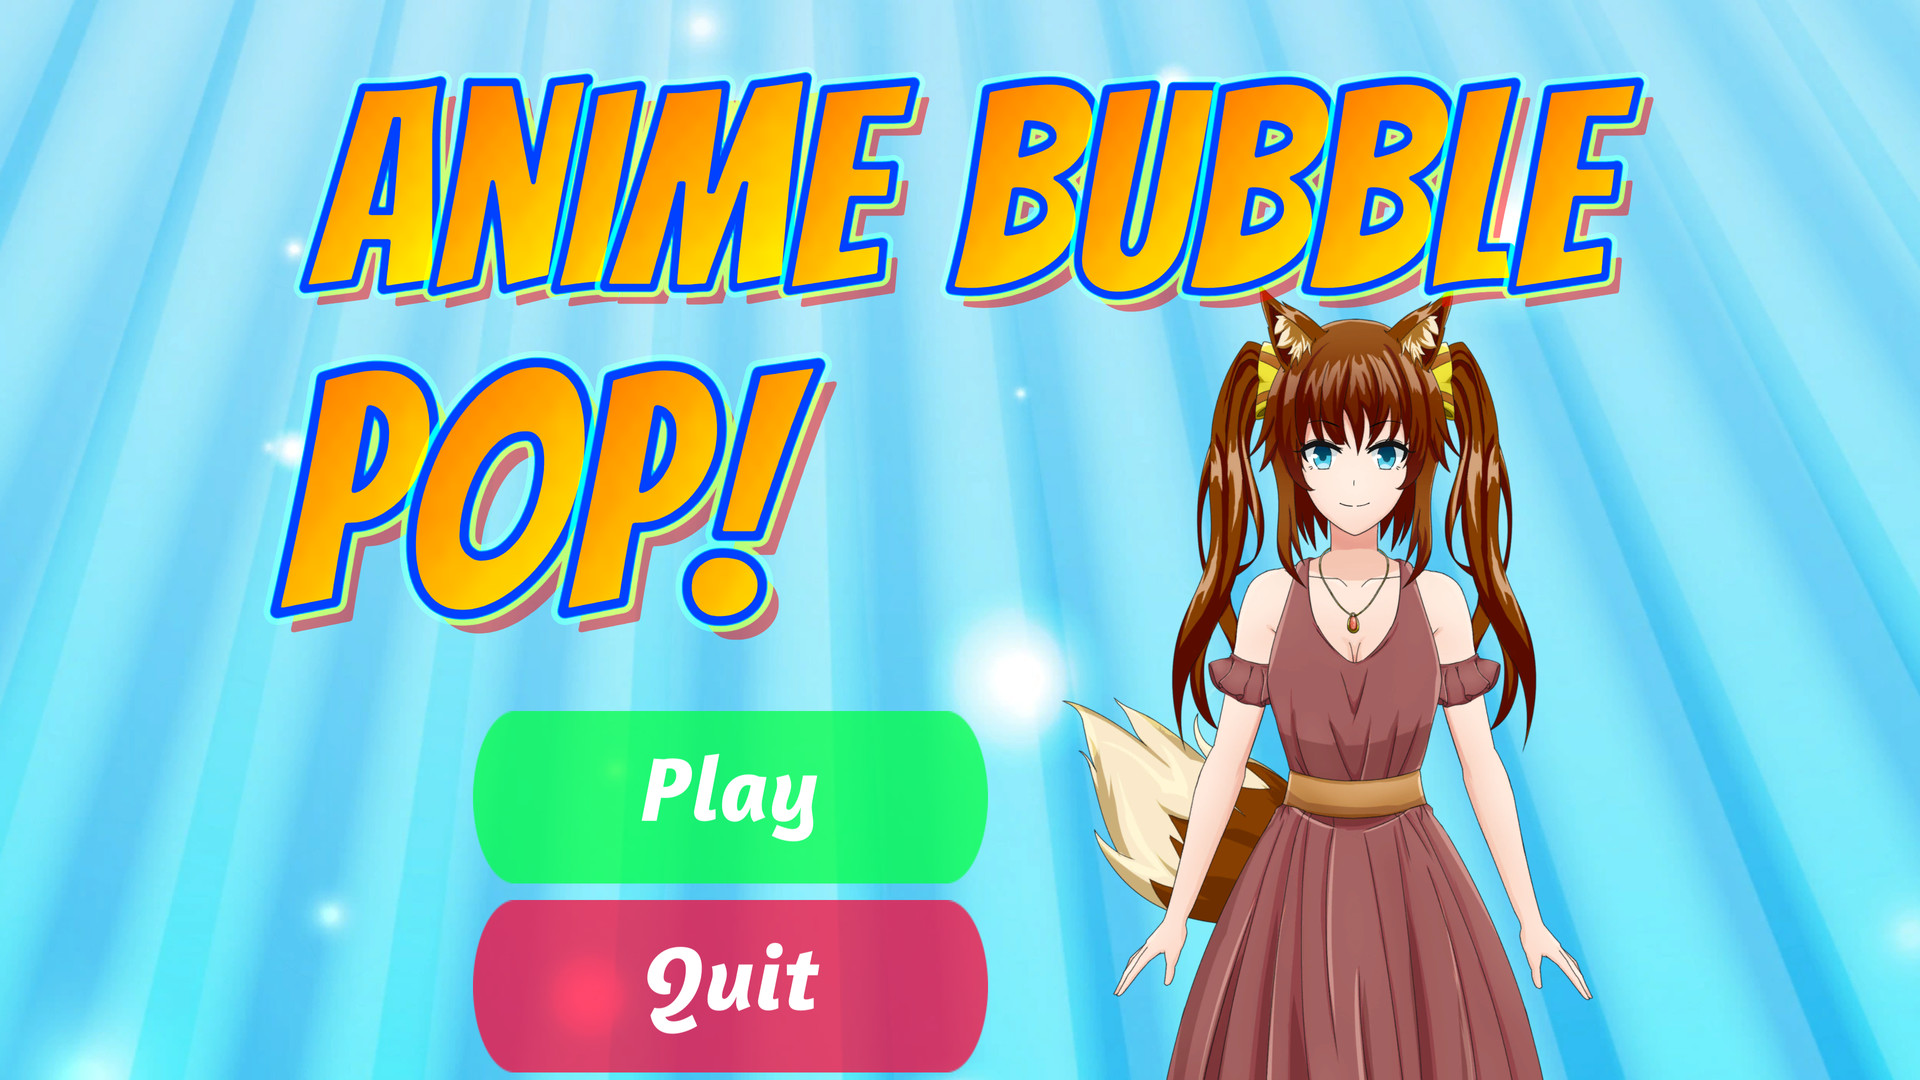 Anime Bubble Pop - SteamSpy - All the data and stats about Steam games